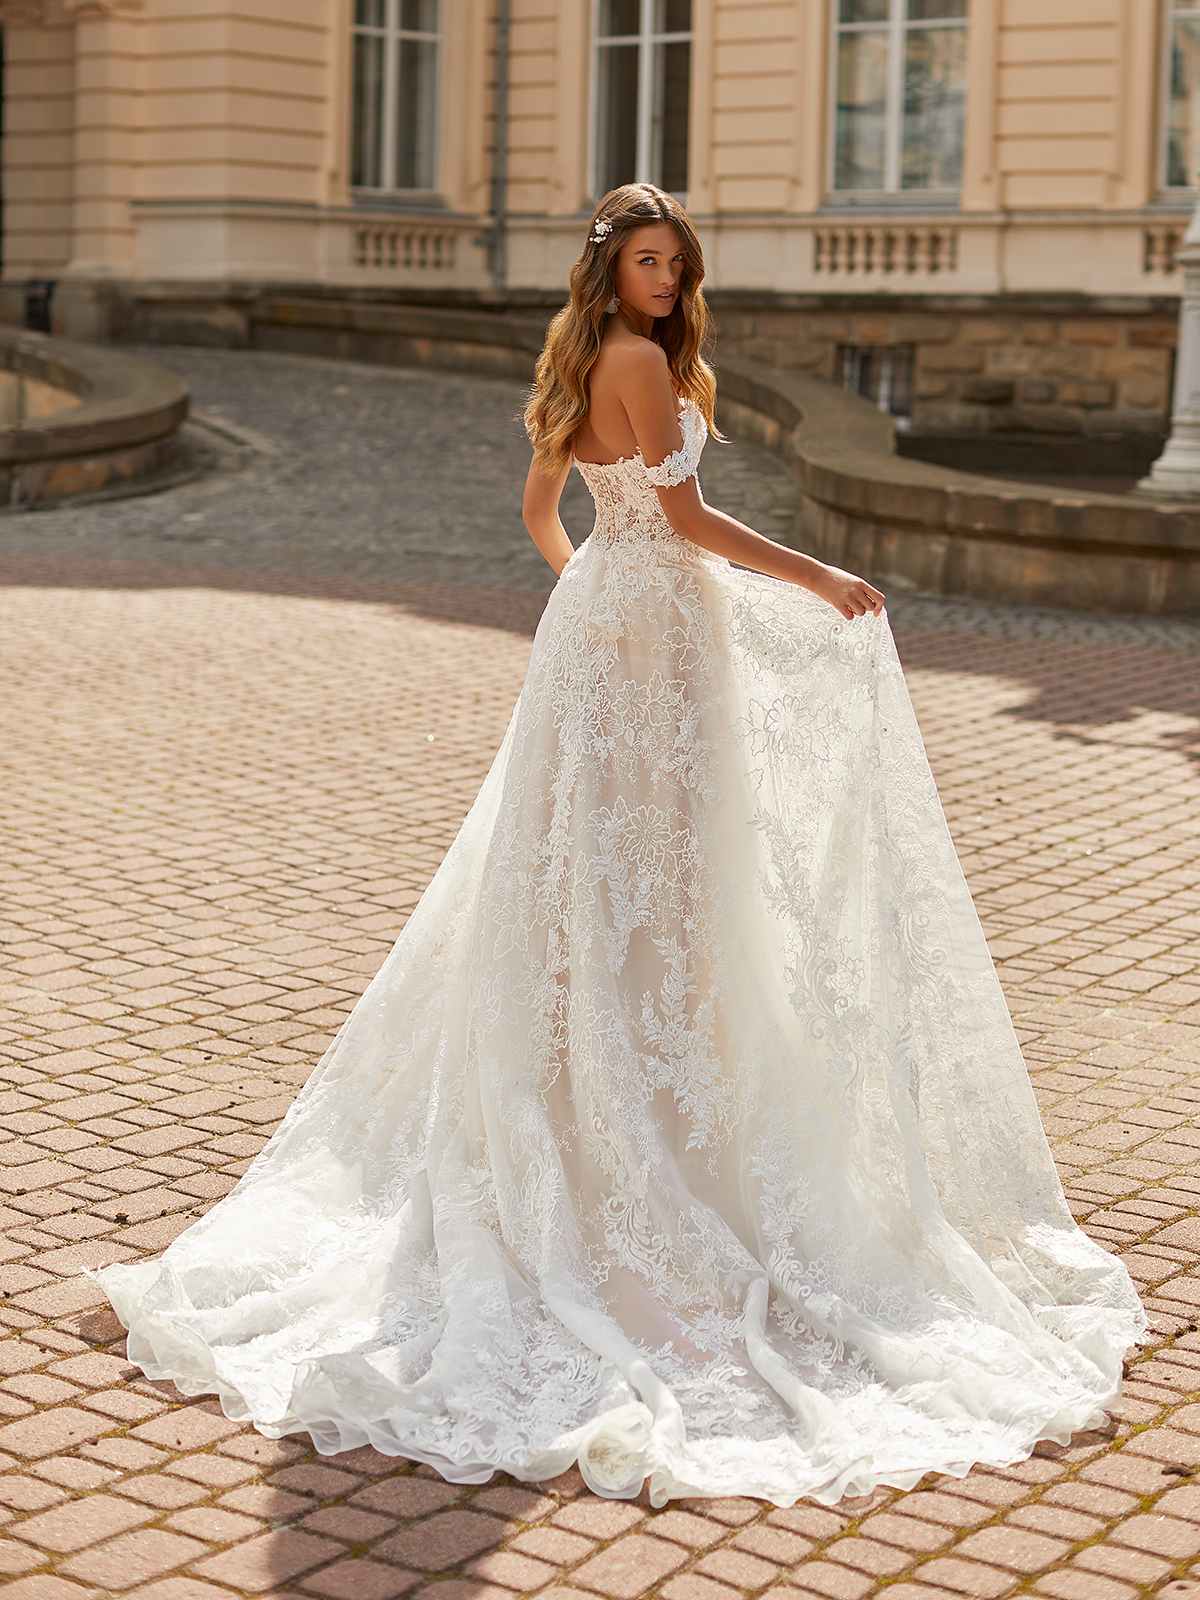 Affordable Lace Wedding Dresses That You'll Love